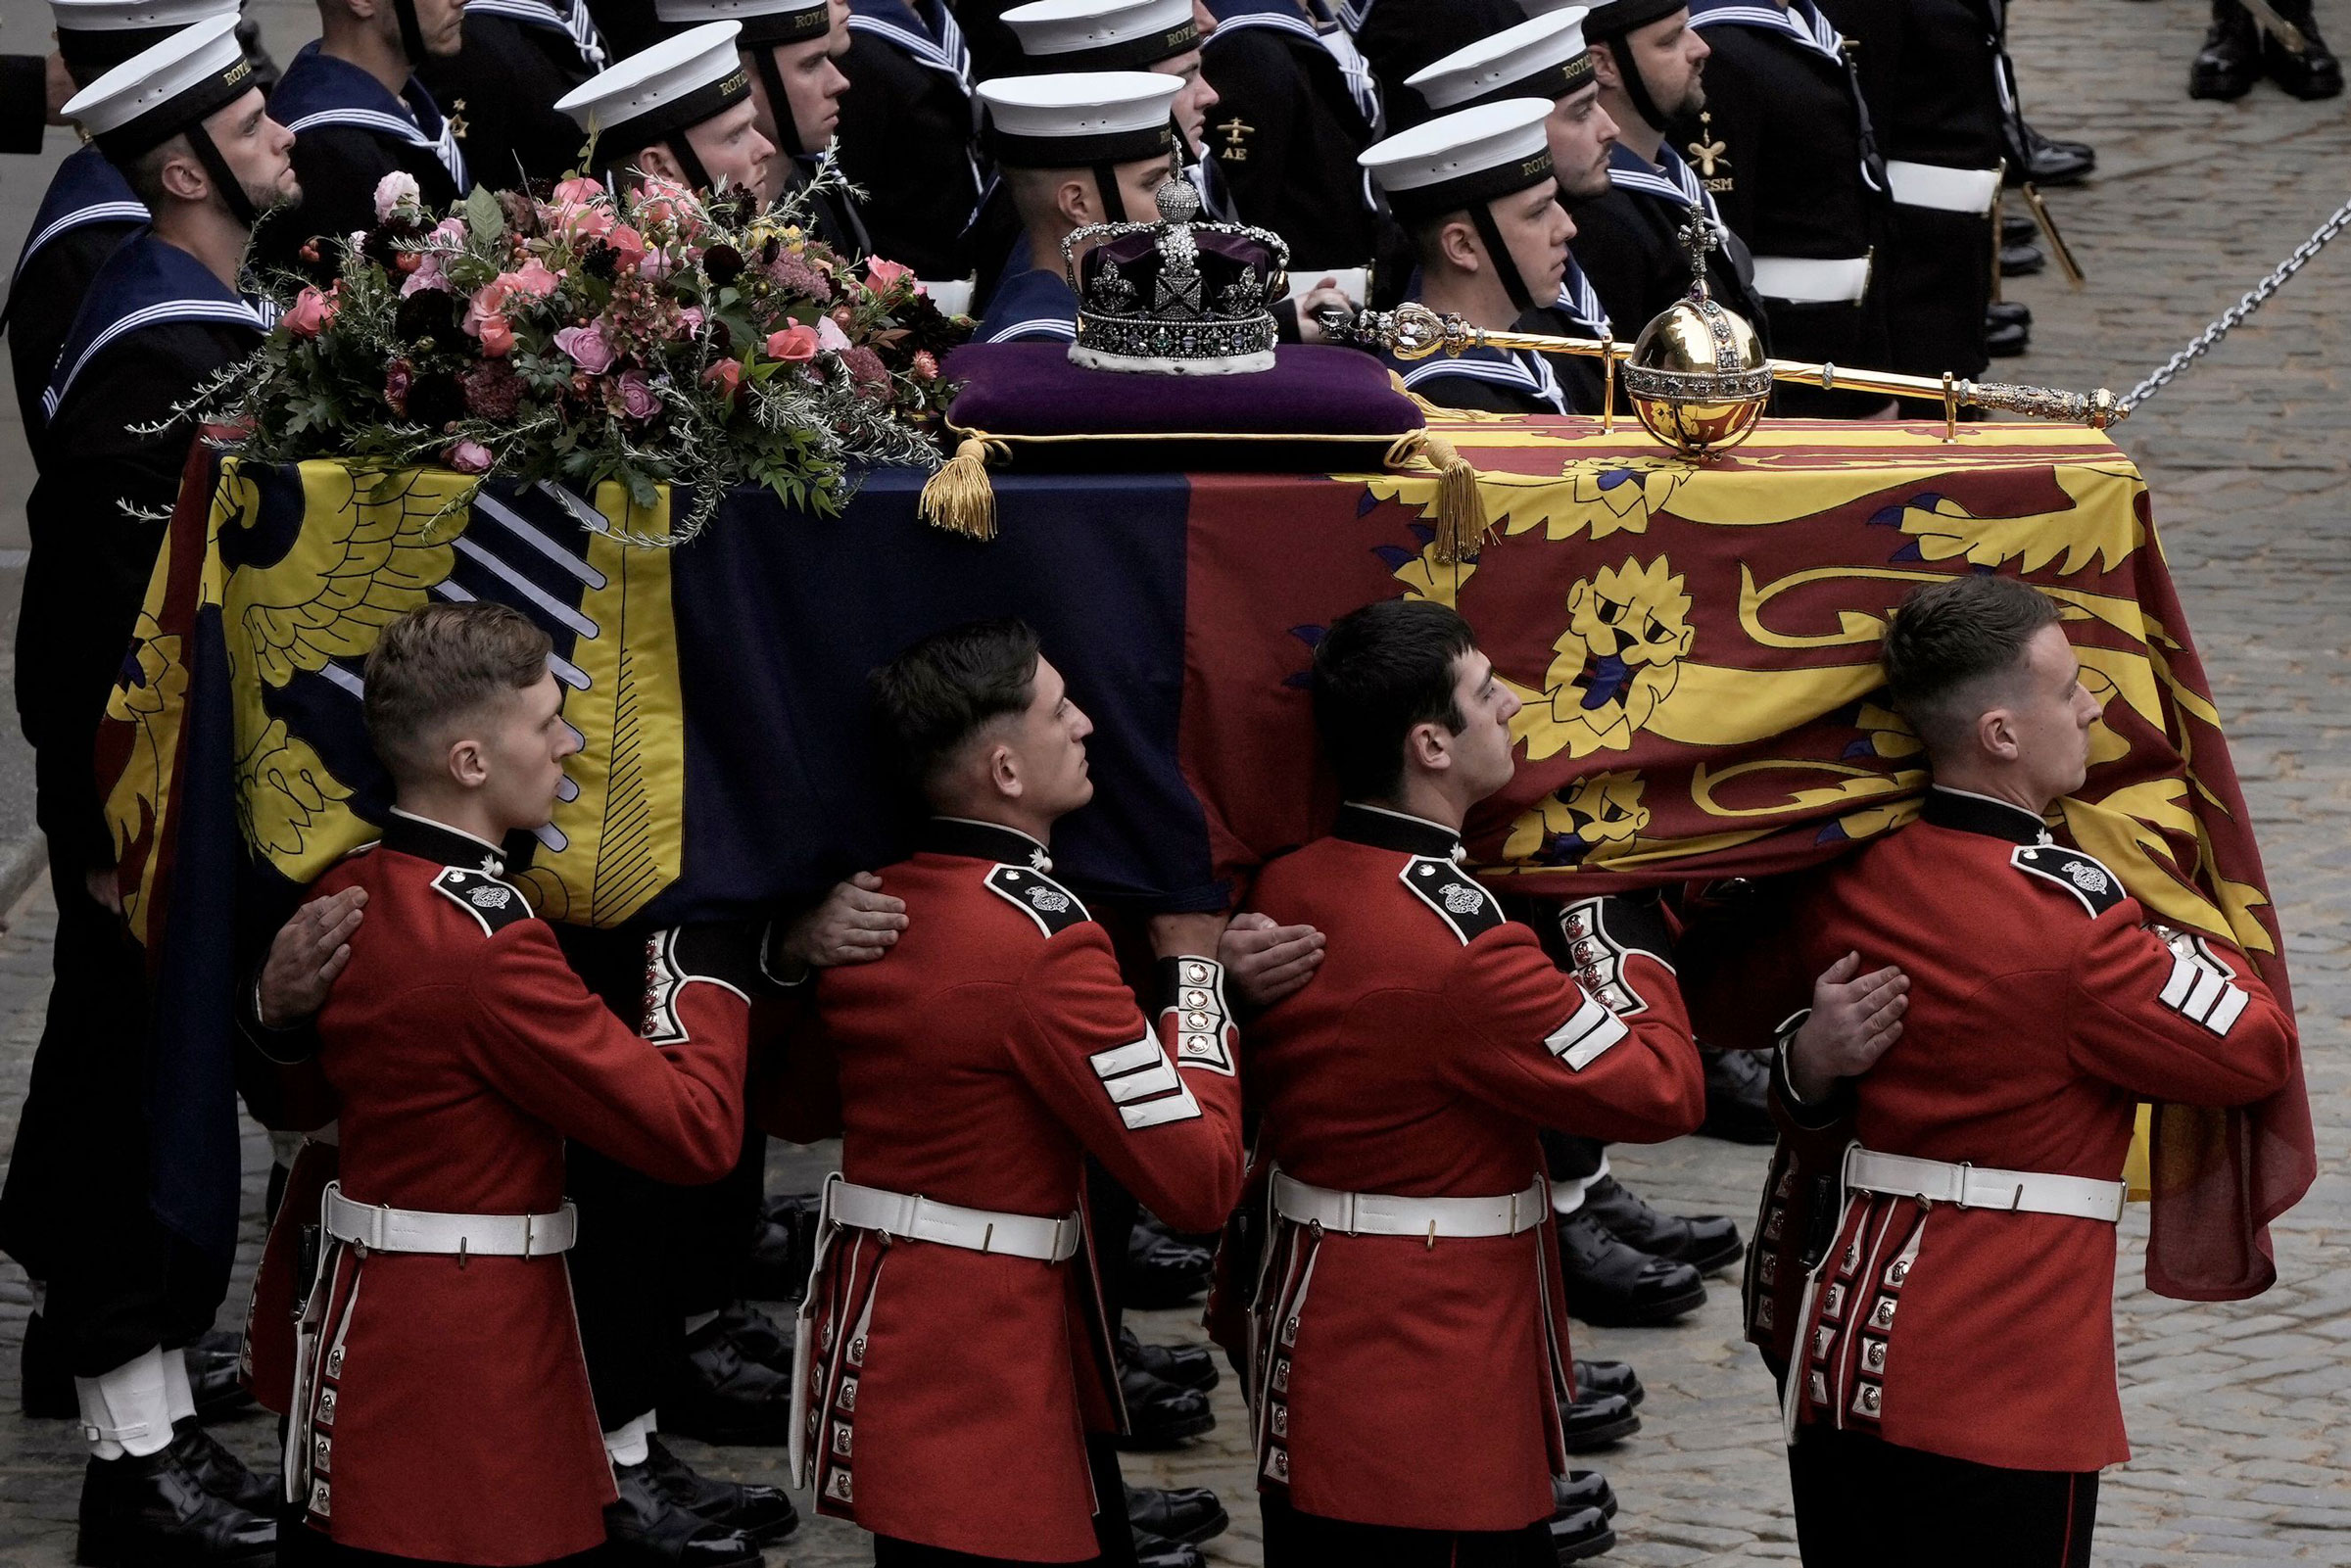 The coffin of Queen Elizabeth II is loaded onto a gun carriage, which was pulled by royal navy sailors on its journey from from Westminster Hall for the funeral service in Westminster Abbey. (Nariman El-Mofty—Pool/AFP/Getty Images)